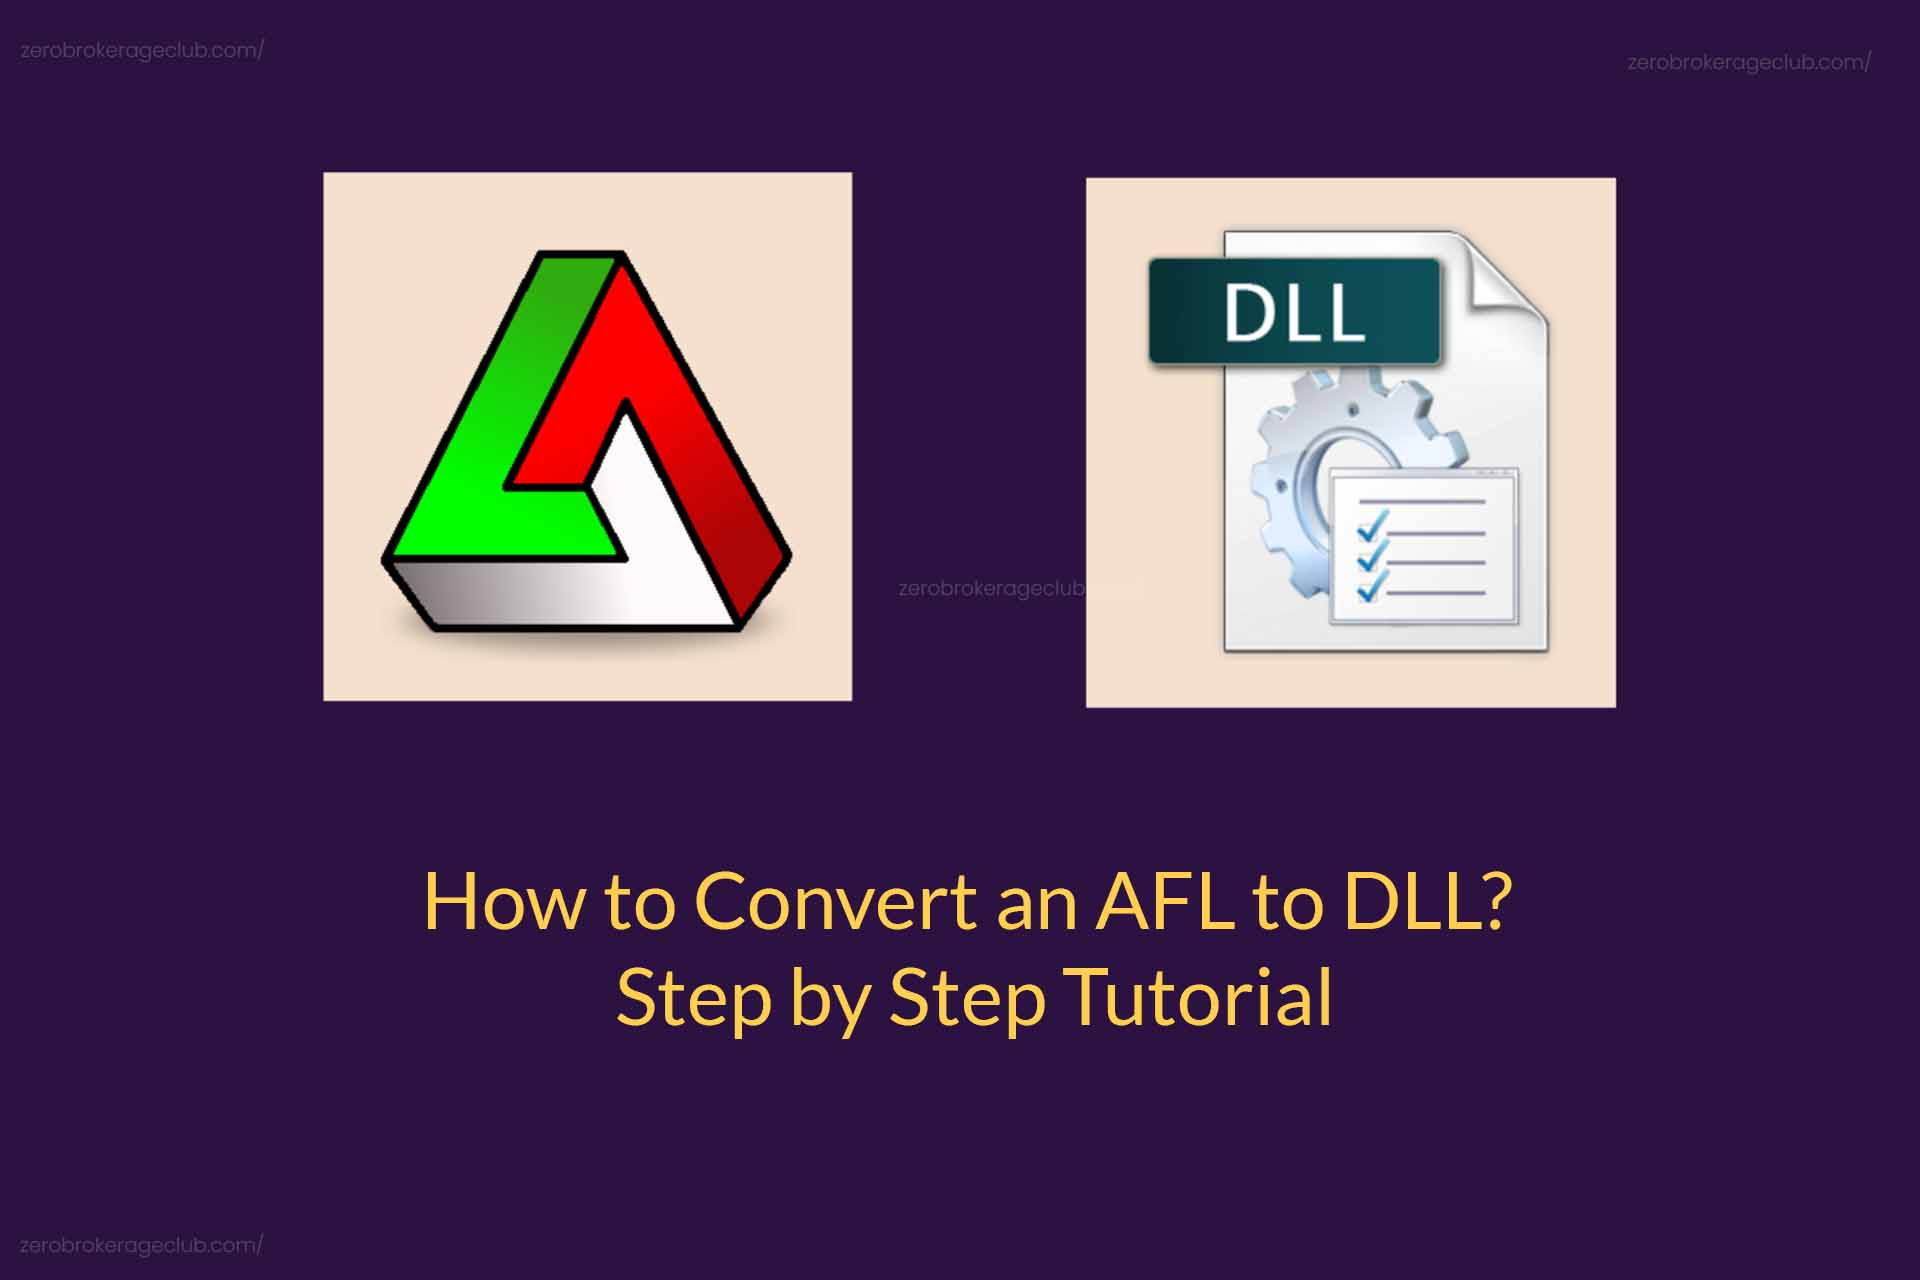 How to Convert an AFL to DLL? Step by Step Tutorial